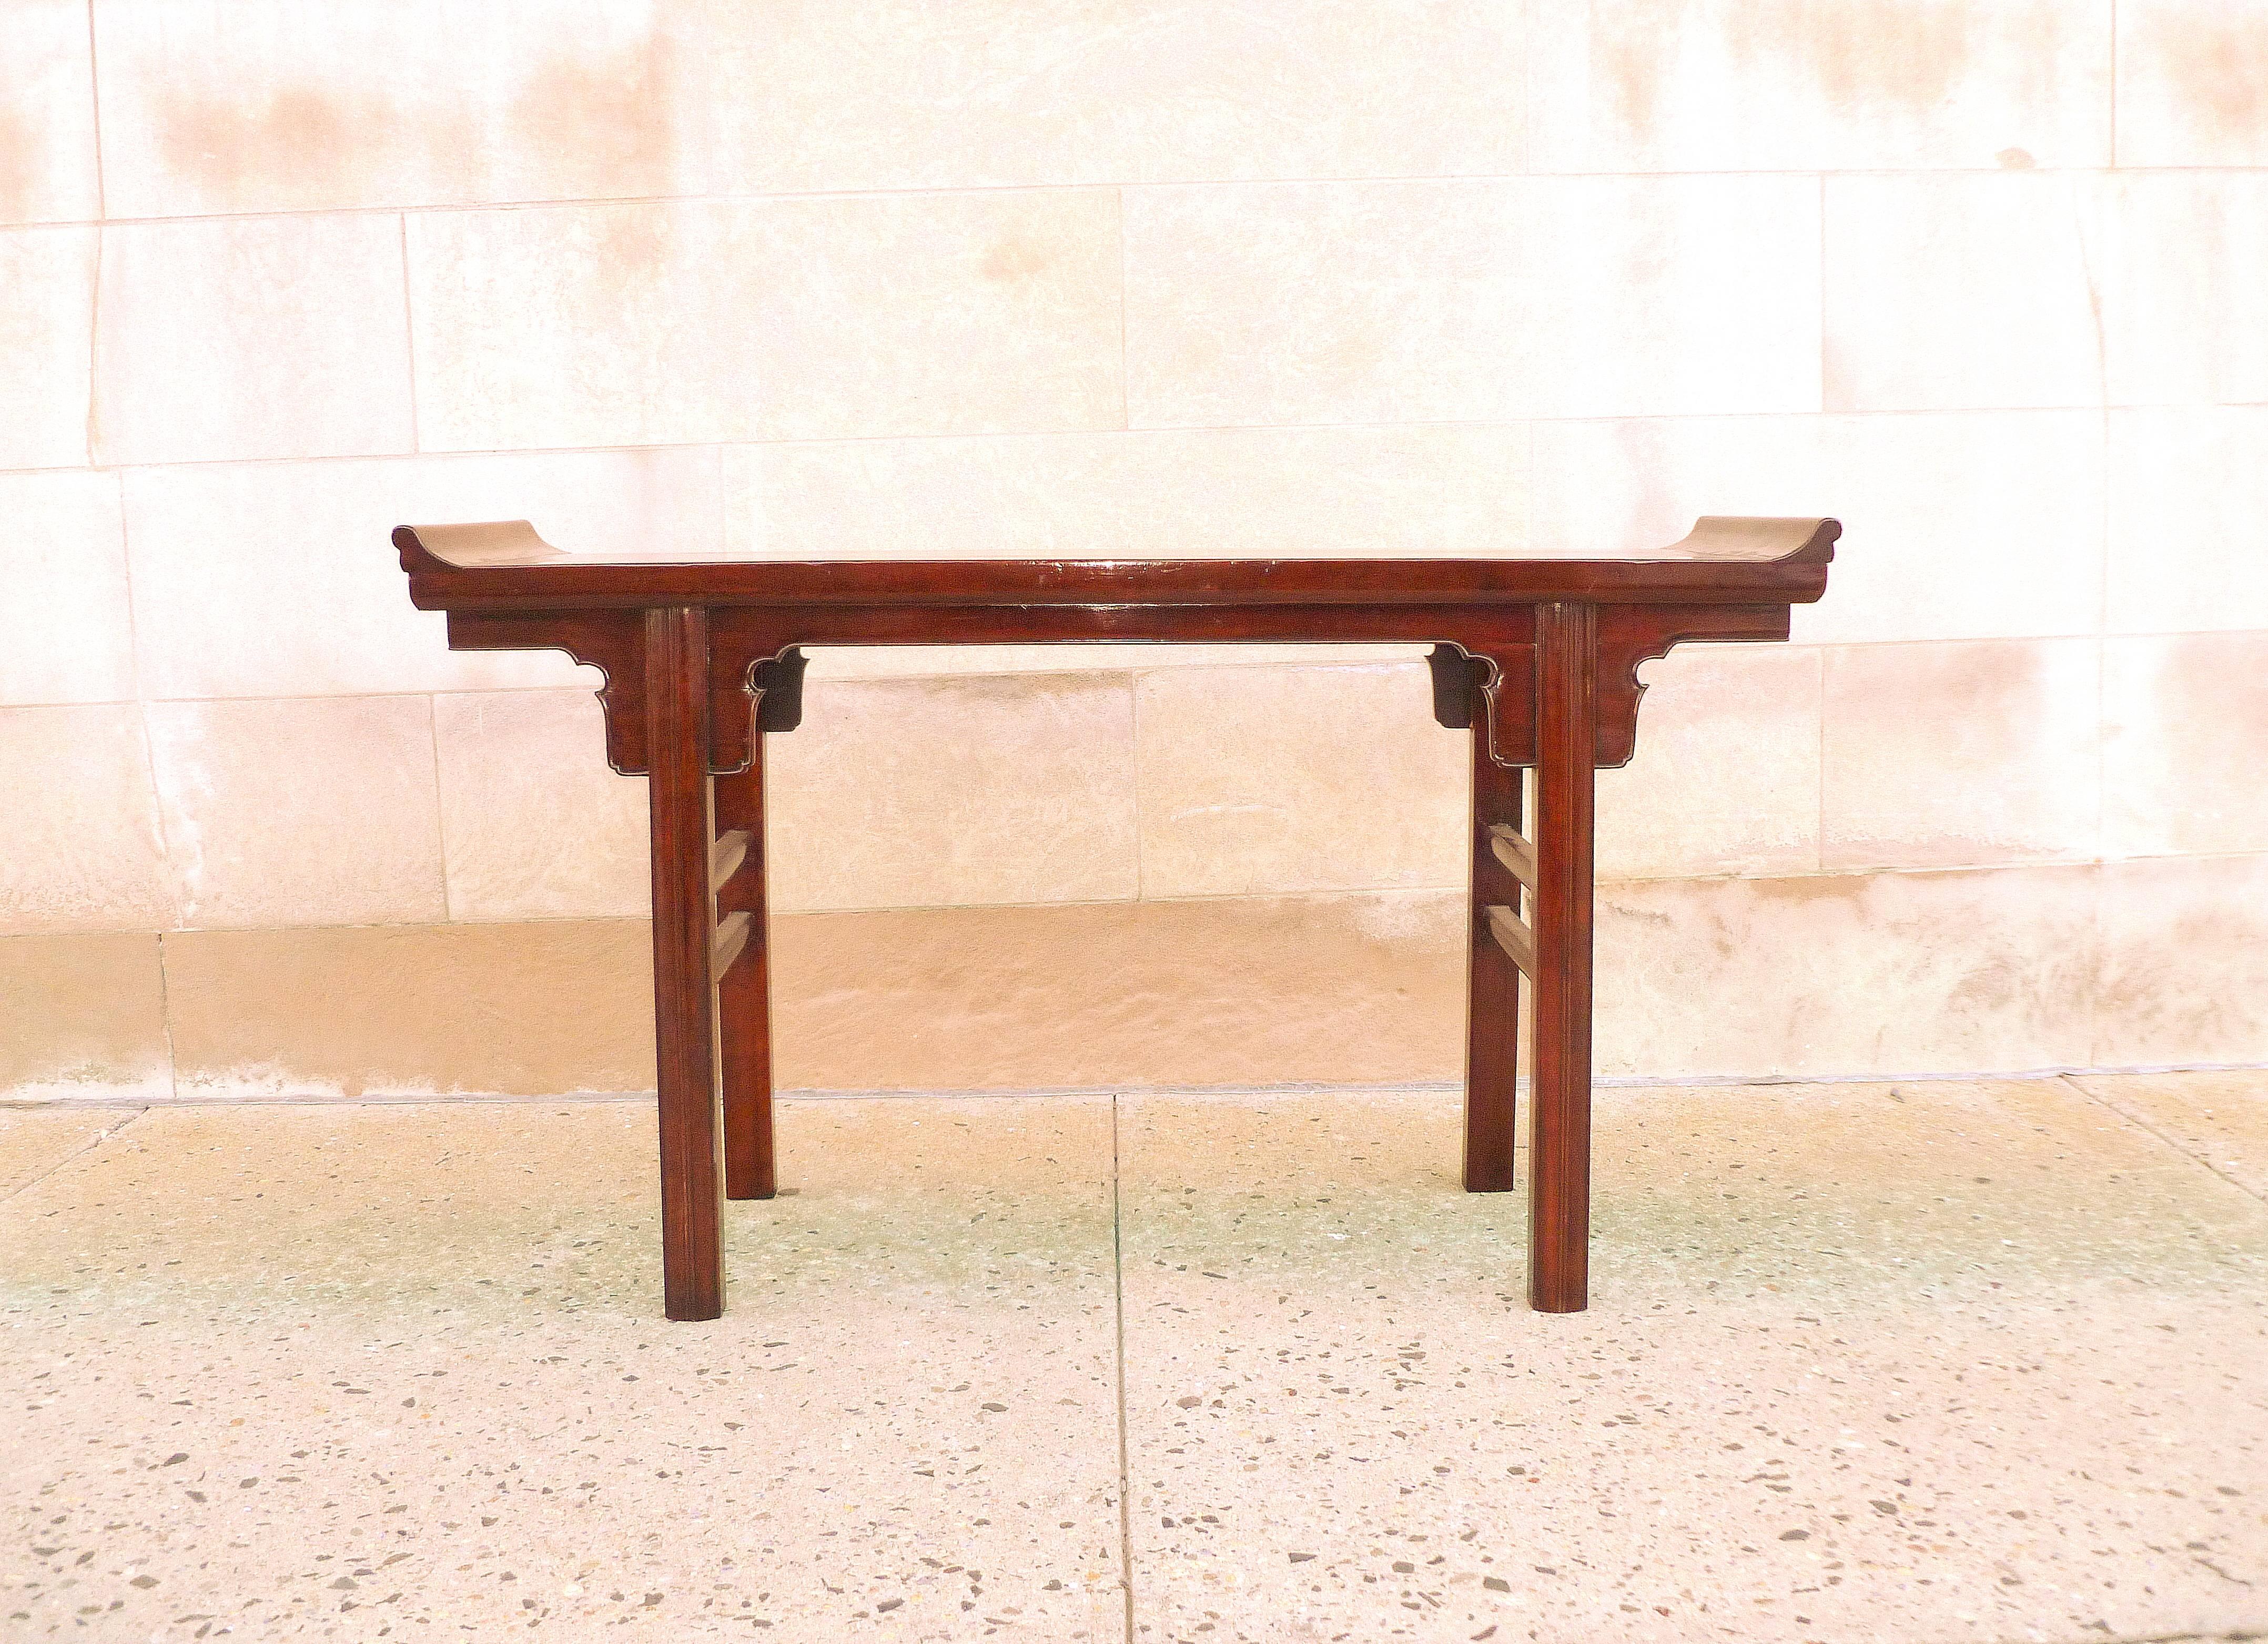 A refined ju mu wood altar table with everted flanges, supported by straight legs, beautiful color, form and lines. We carry fine quality furniture with elegant finished and has been appeared many times in 